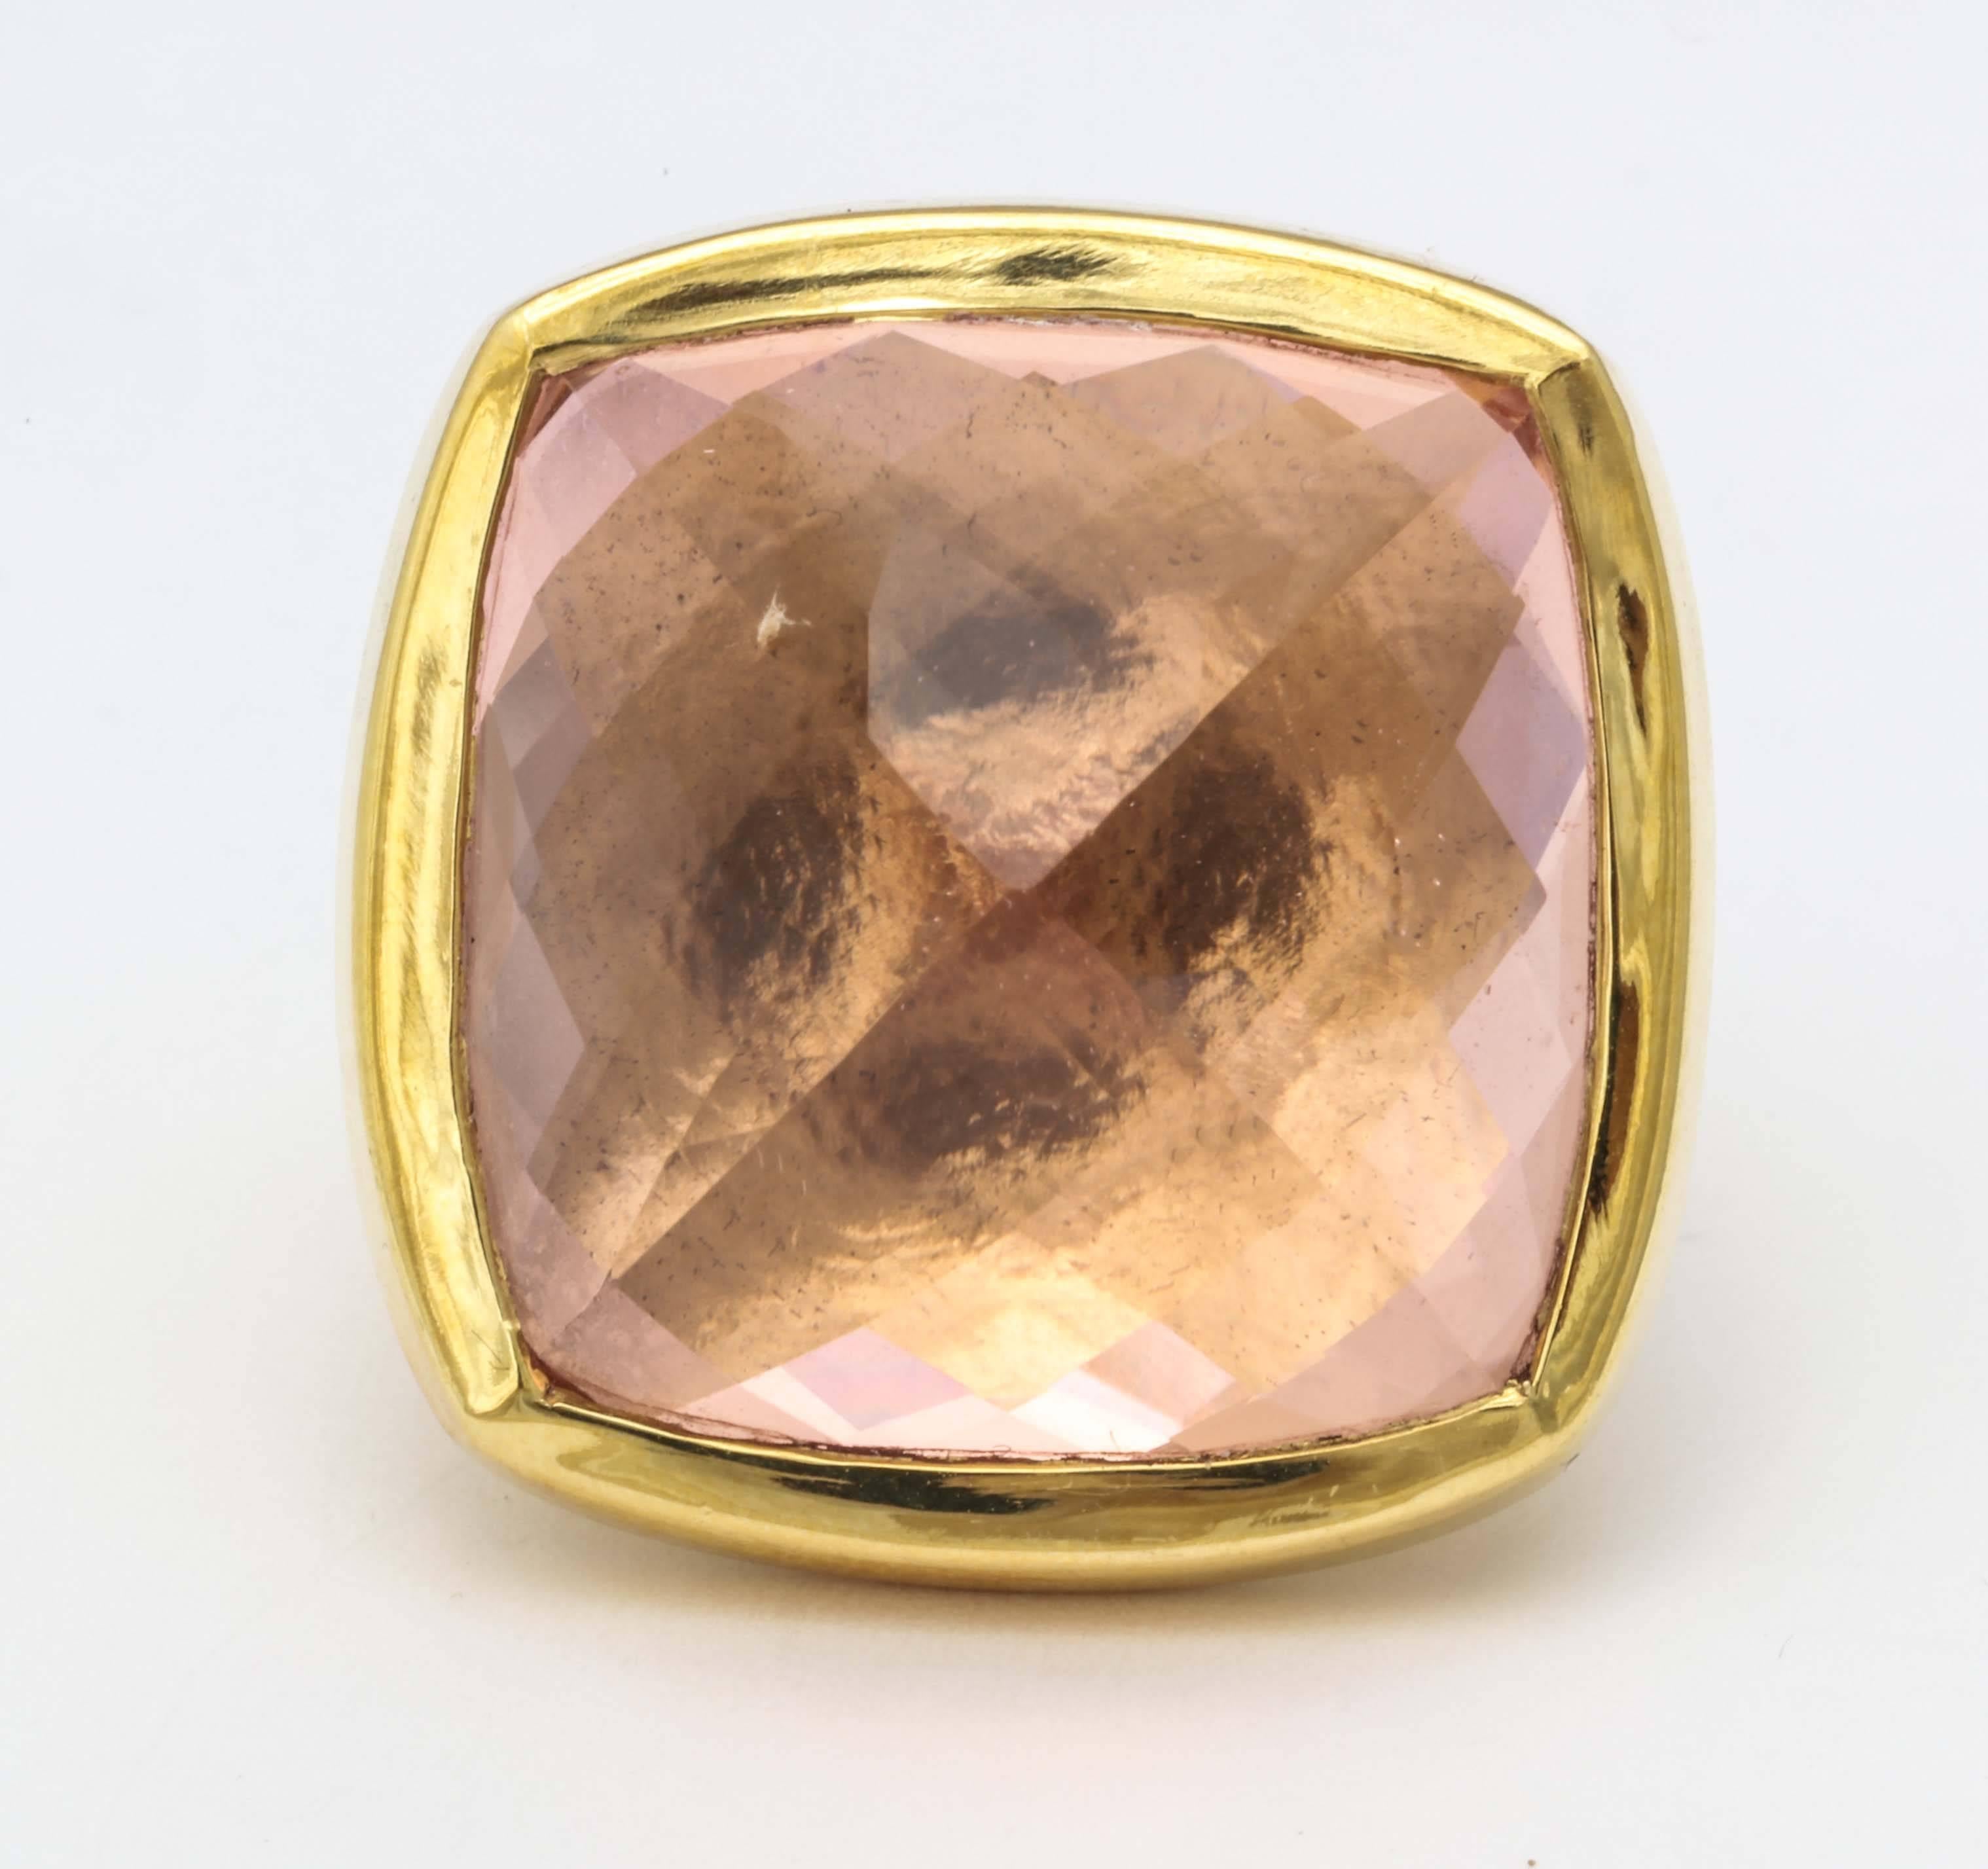 An 18kt yellow gold ring featuring a large faceted morganite which has been bezel set, and set upside down. size 6.75
Stone Height: .75 inch